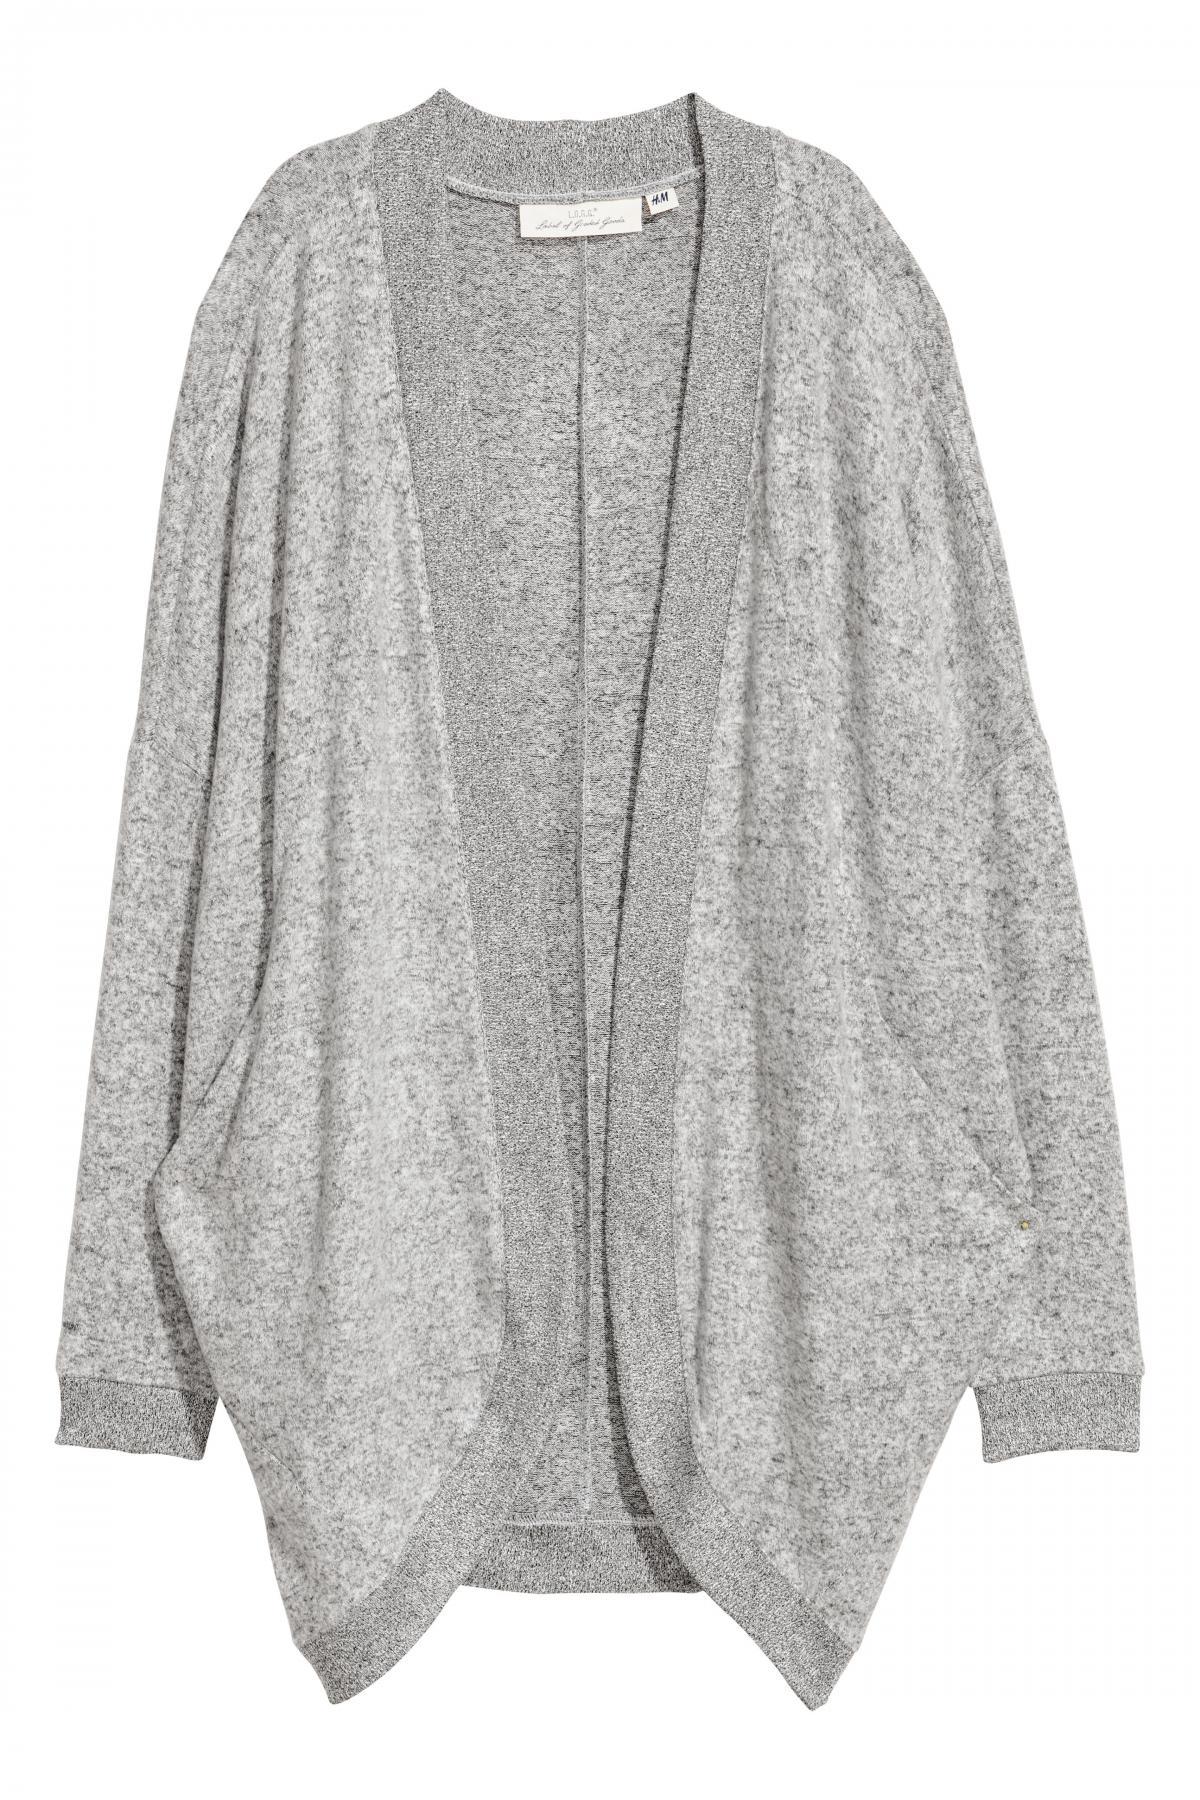 Buy cardigan H&M women's 0546967001 gray color with worldwide delivery ...